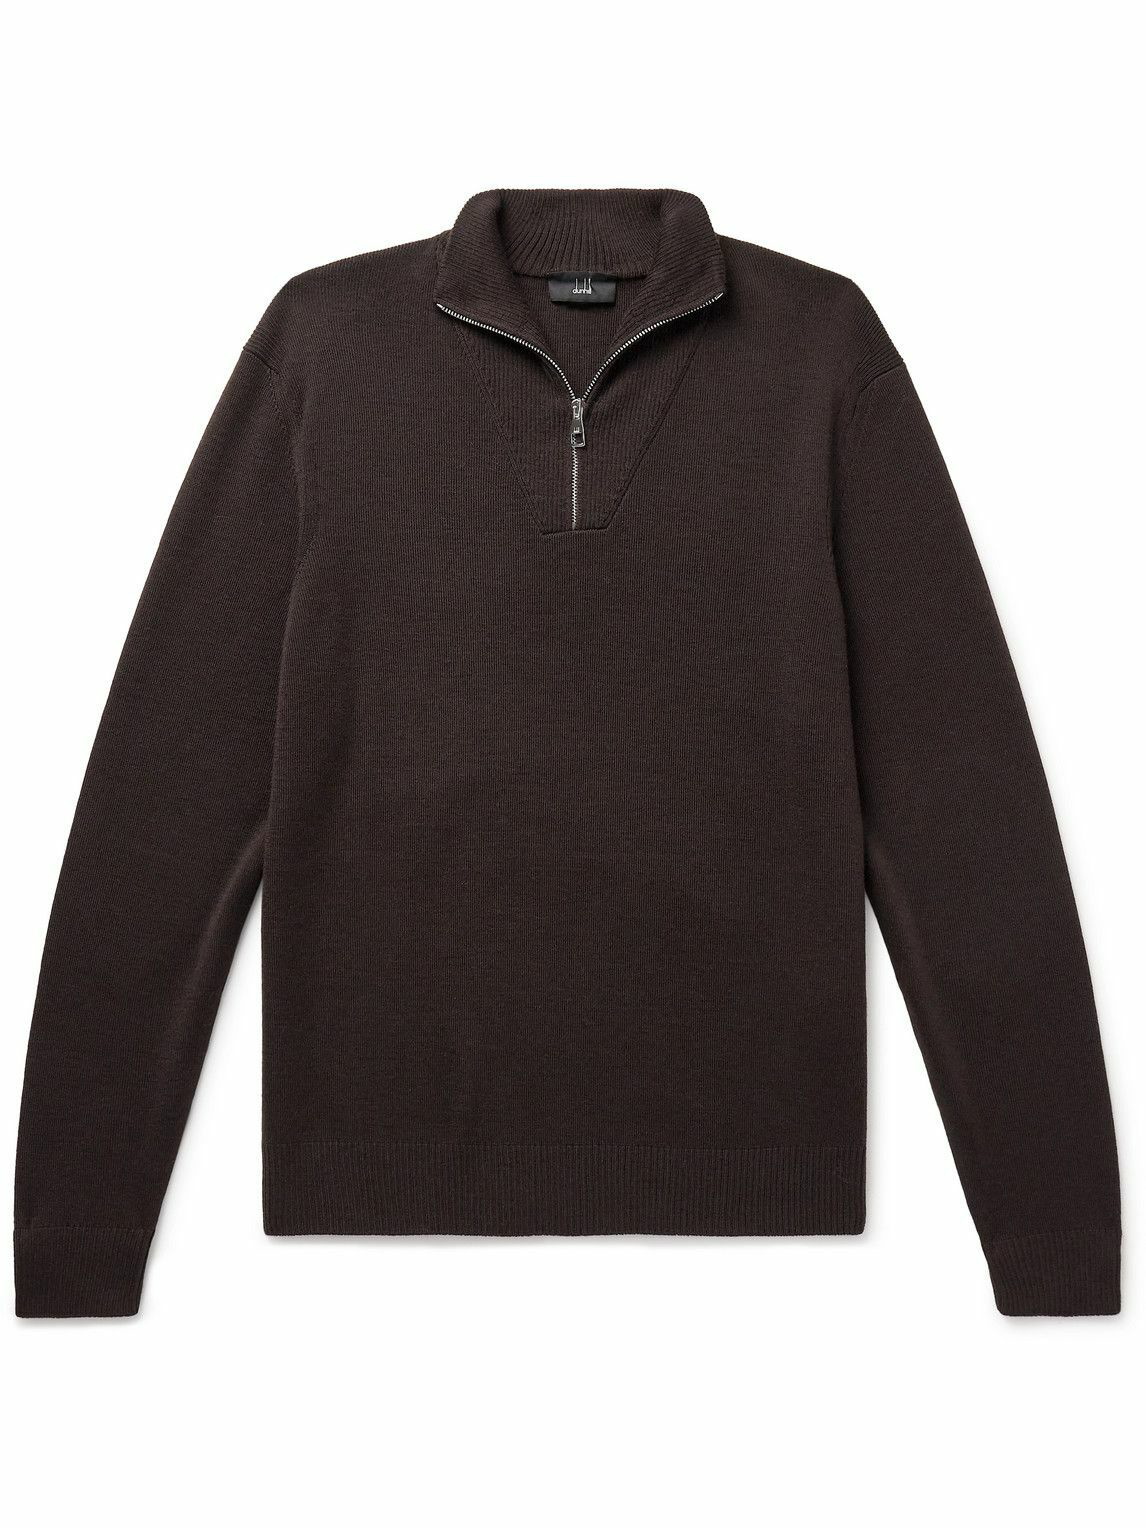 Photo: Dunhill - Slim-Fit Suede-Trimmed Wool Half-Zip Sweater - Brown